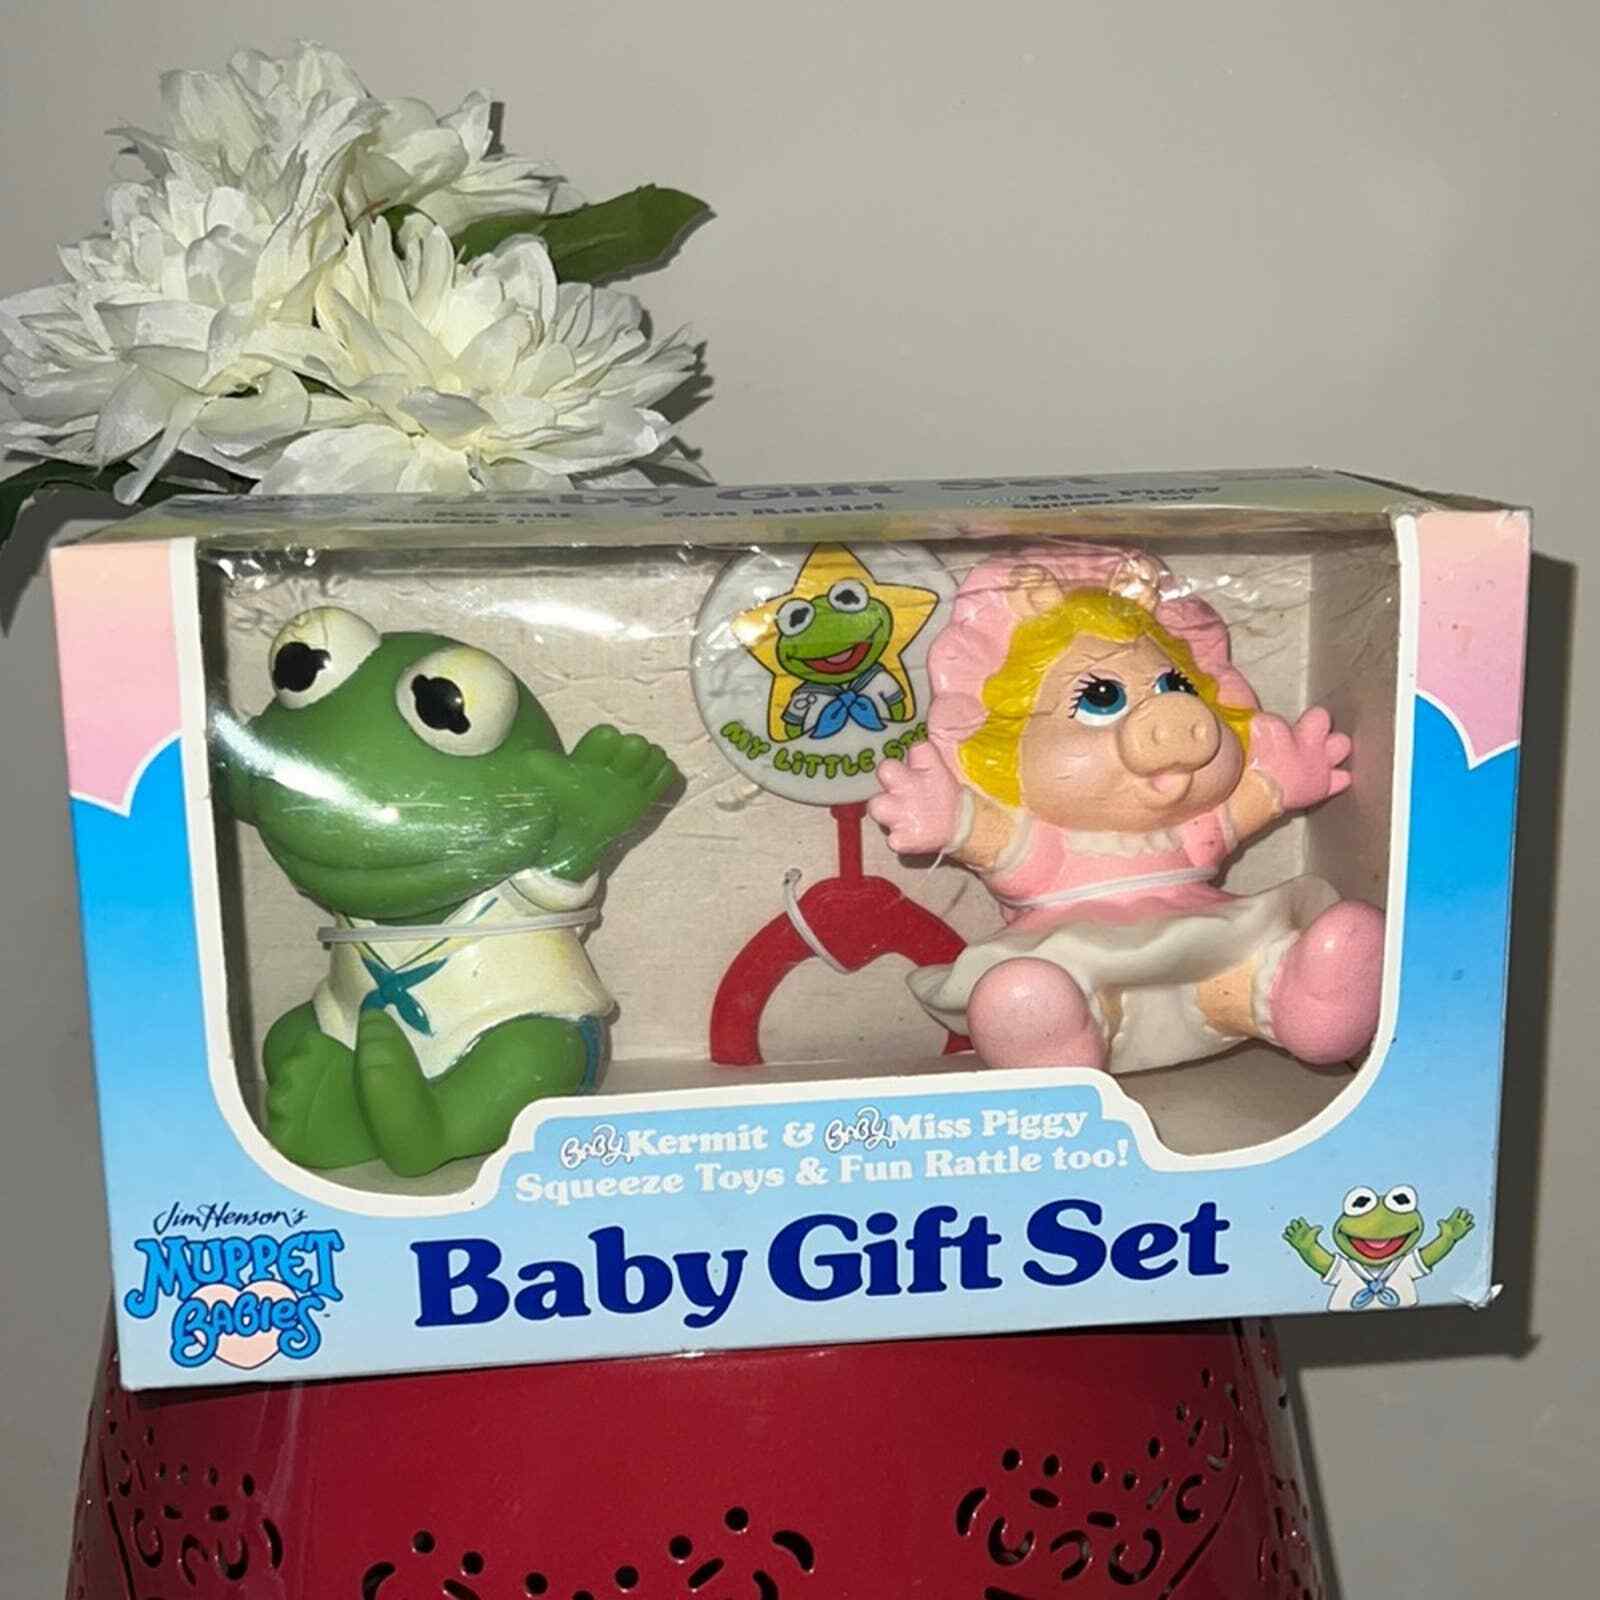 New Jim Henson Muppet Babies Baby Gift Set Kermit Miss Piggy Squeeze Toy Rattle